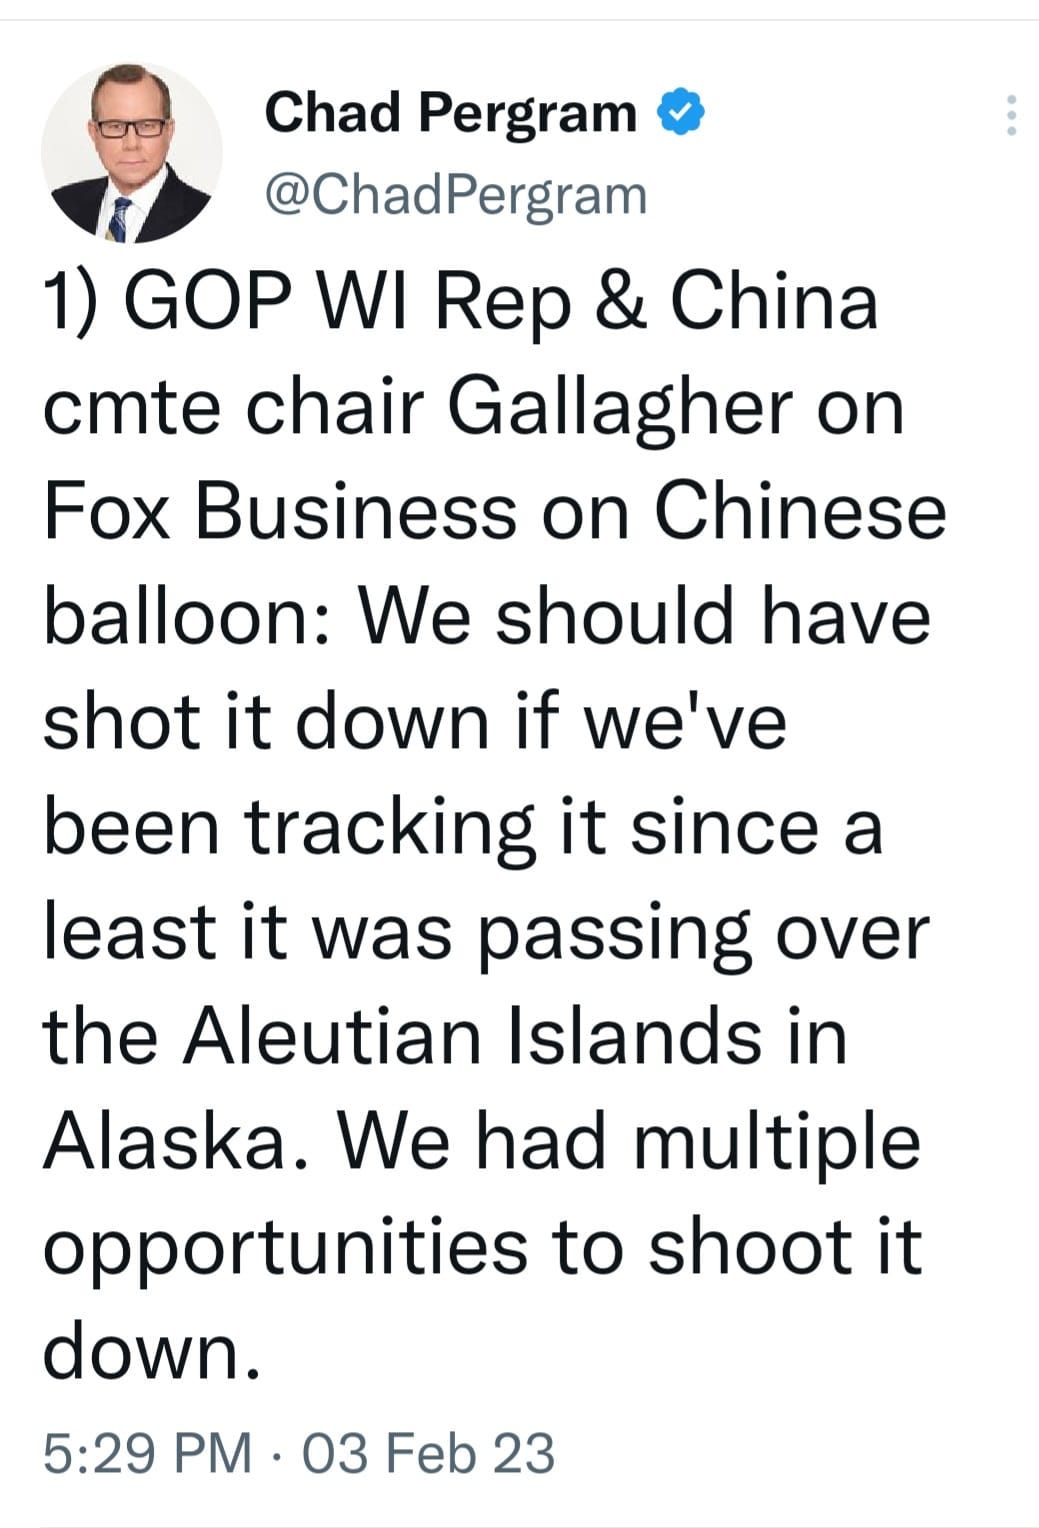 May be an image of 1 person and text that says 'Chad Pergram @ChadPergram 1) GOP WI Rep & China cmte chair Gallagher on Fox Business on Chinese balloon: We should have shot it down if we've been tracking it since a least it was passing over the Aleutian Islands in Alaska. We had multiple opportunities to shoot it down. 5:29 PM 03 Feb 23'